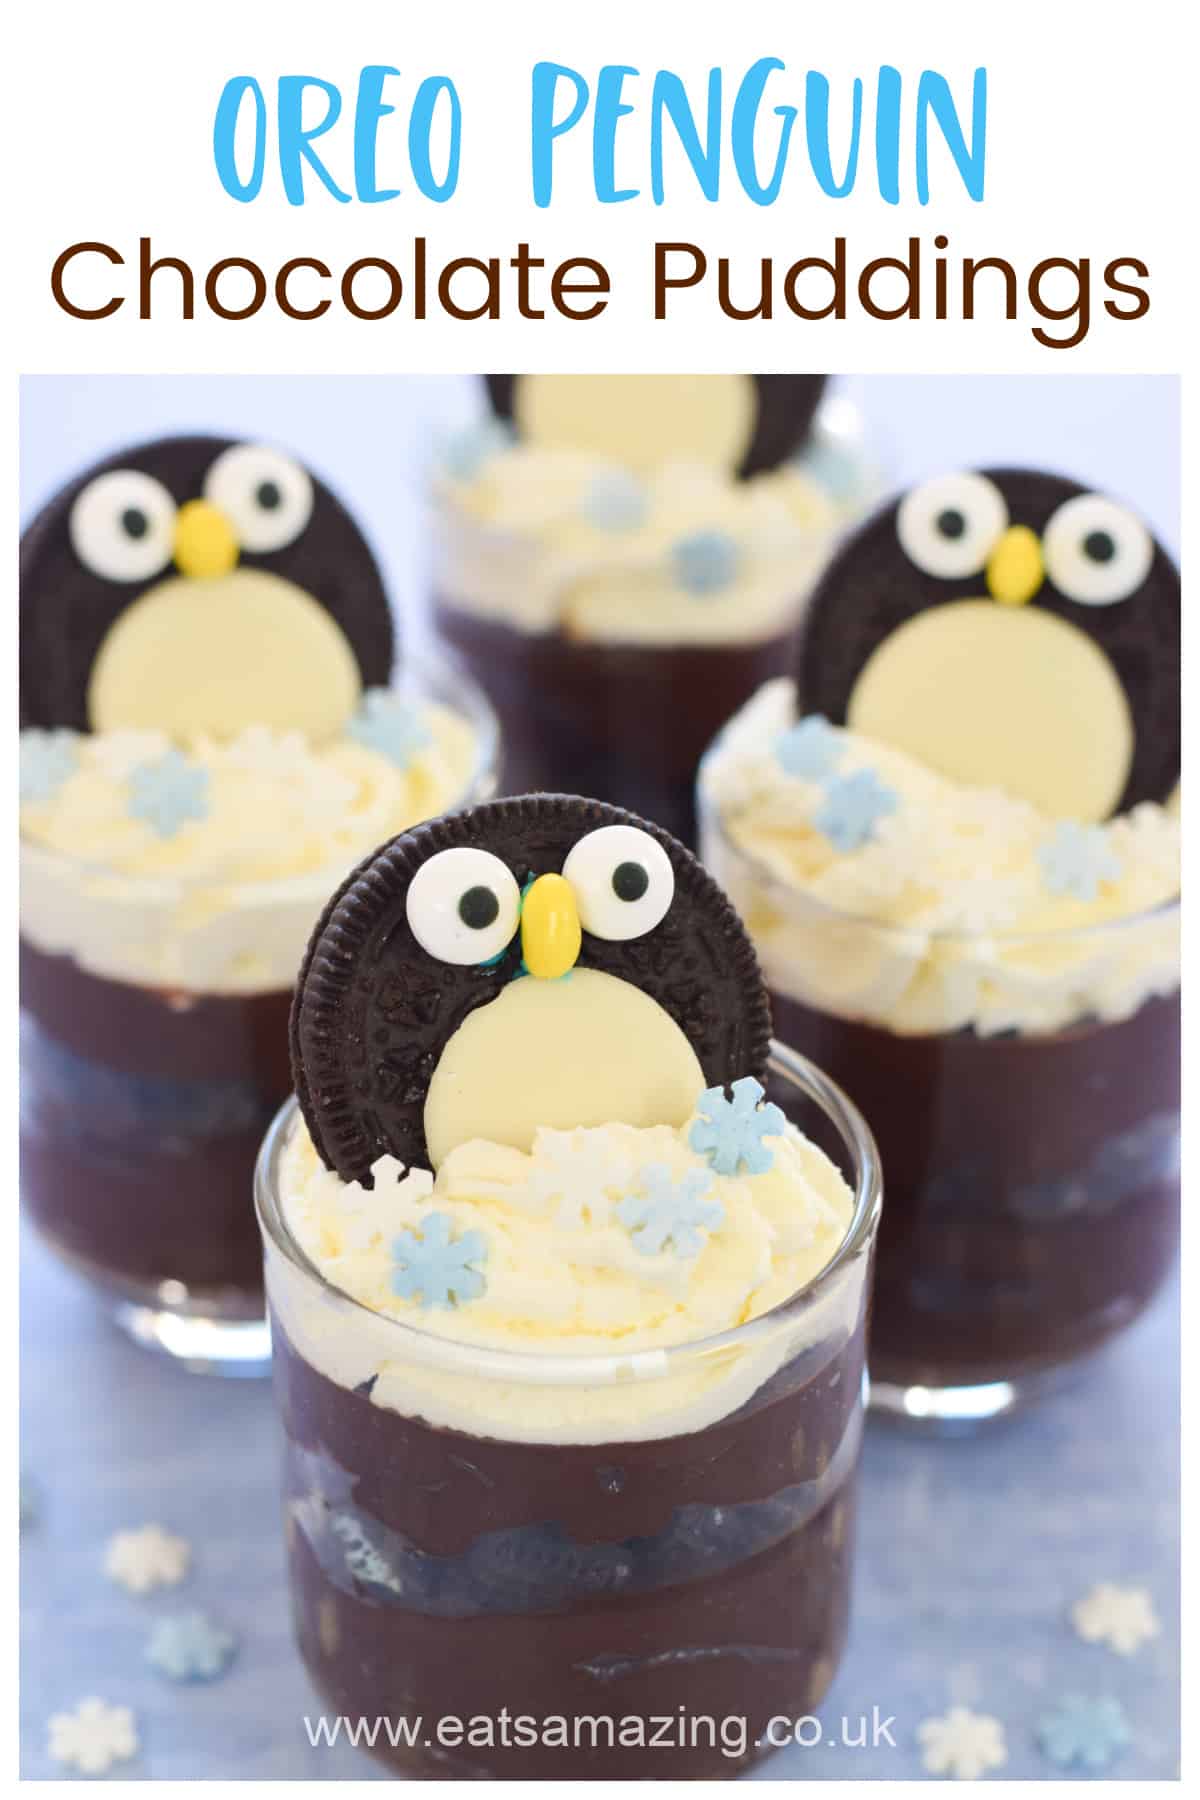 Fun chocolate pudding pots recipe with oreo penguins - perfect for a cute Christmas dessert for kids